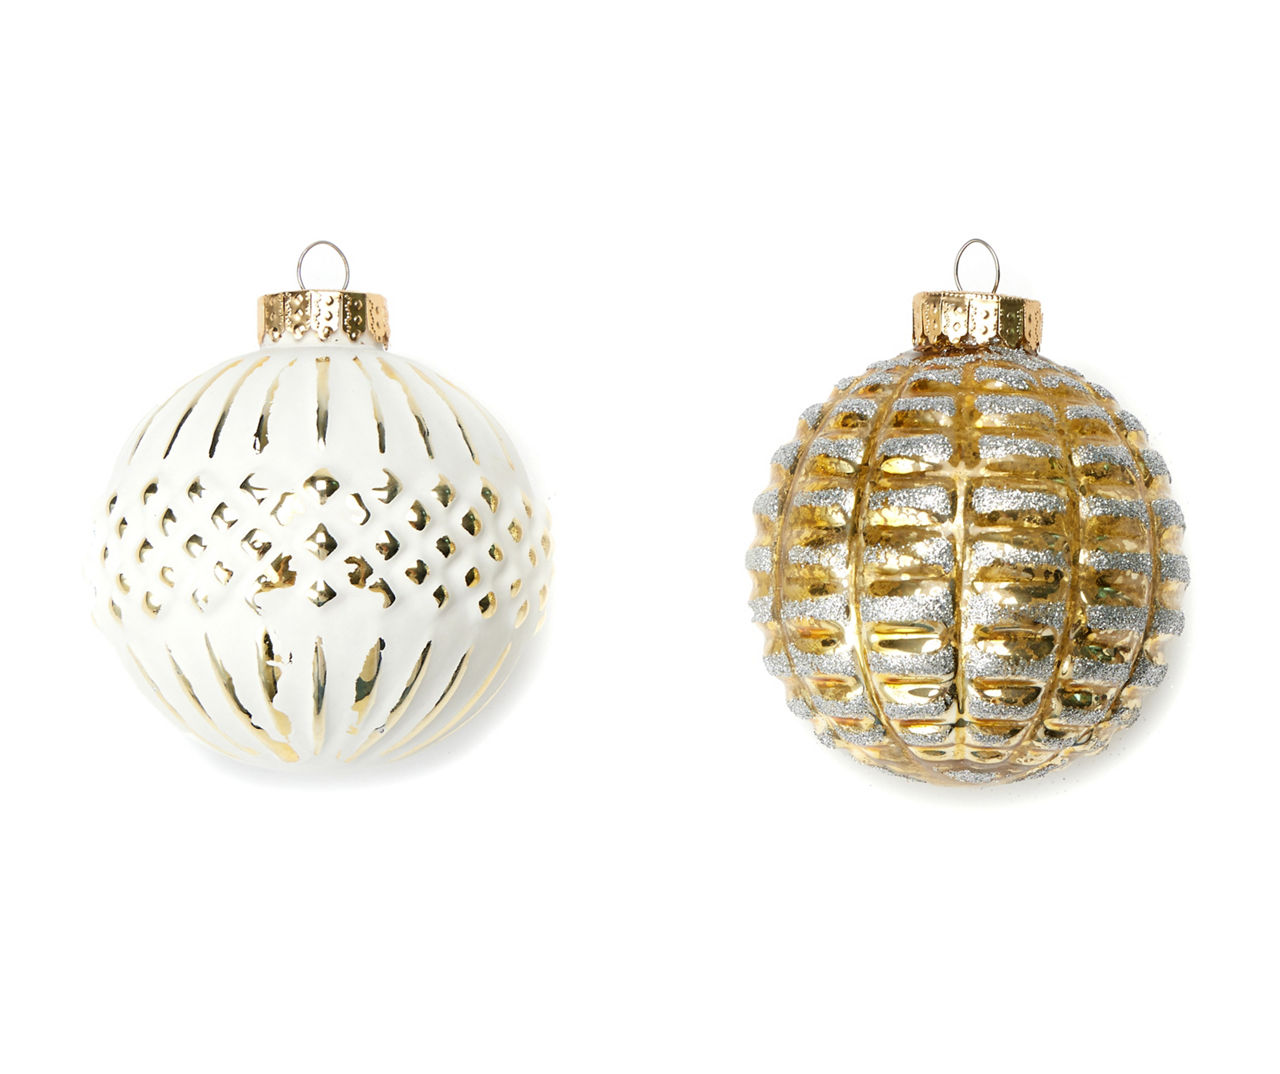 Gold & White Embossed Glass Ornaments, 6-Pack